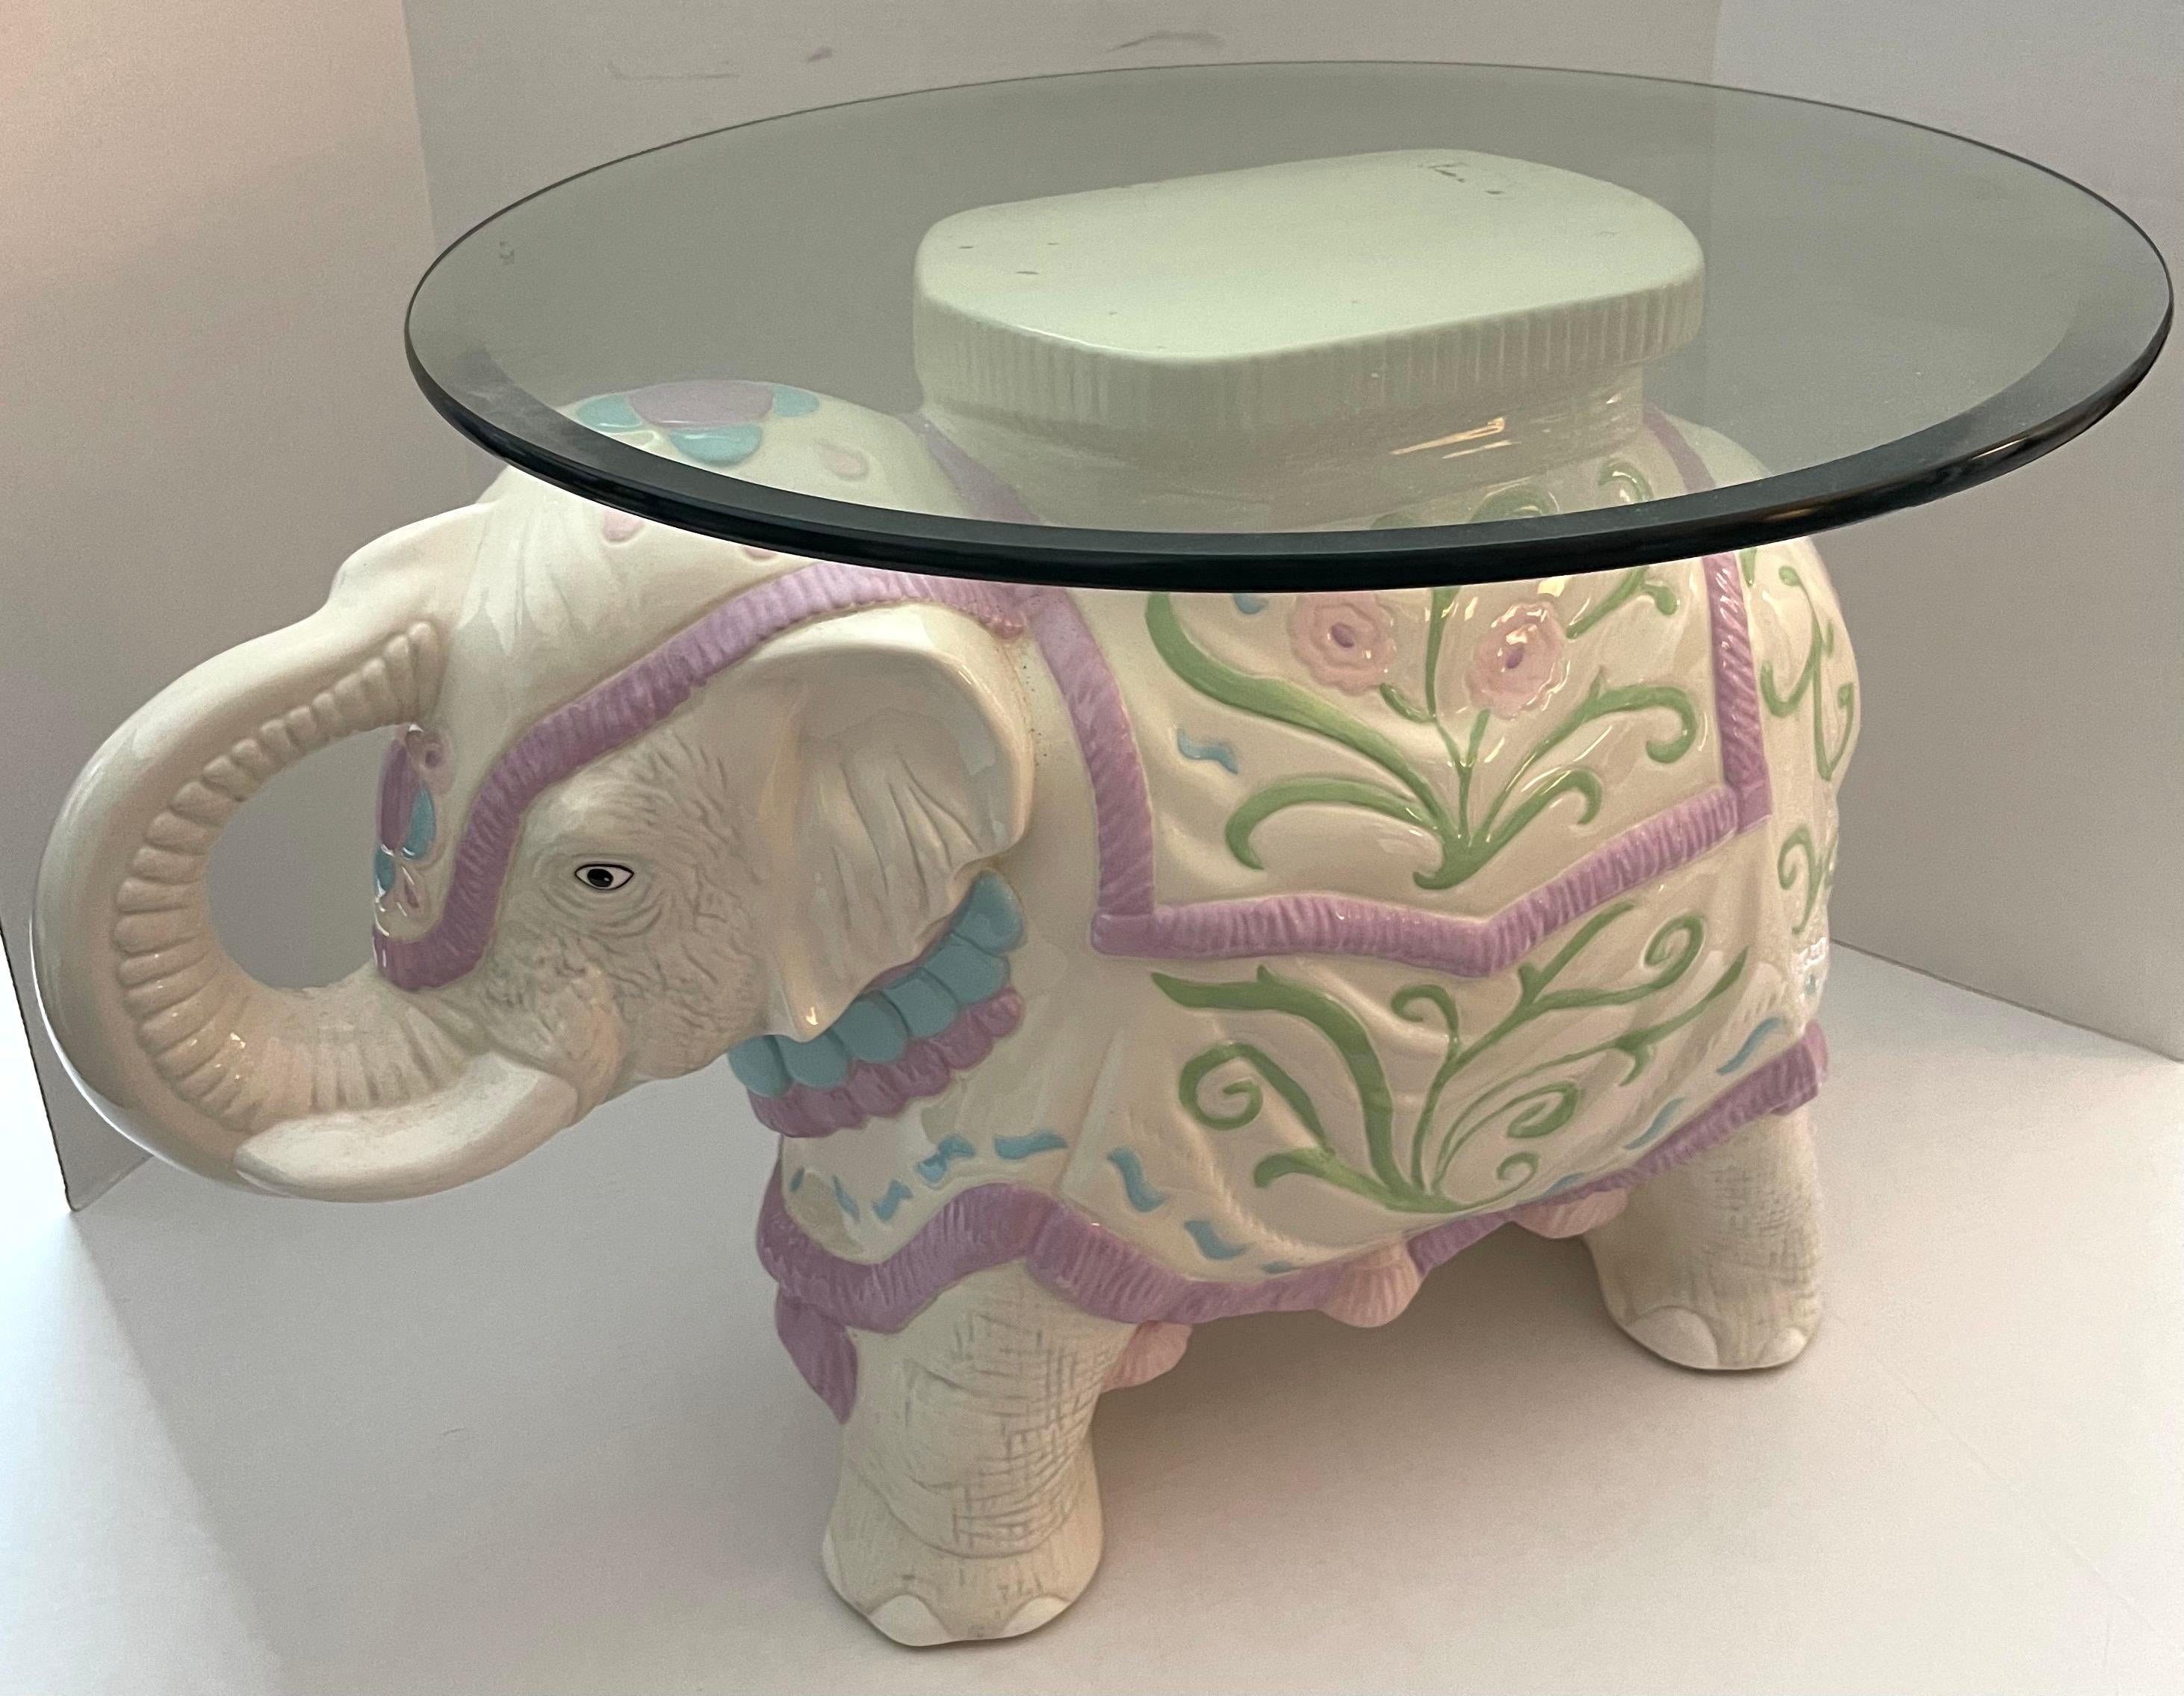 1960s Hollywood Regency style pastel colored ceramic elephant garden stool or side table. Round clear glass top with beveled edge.